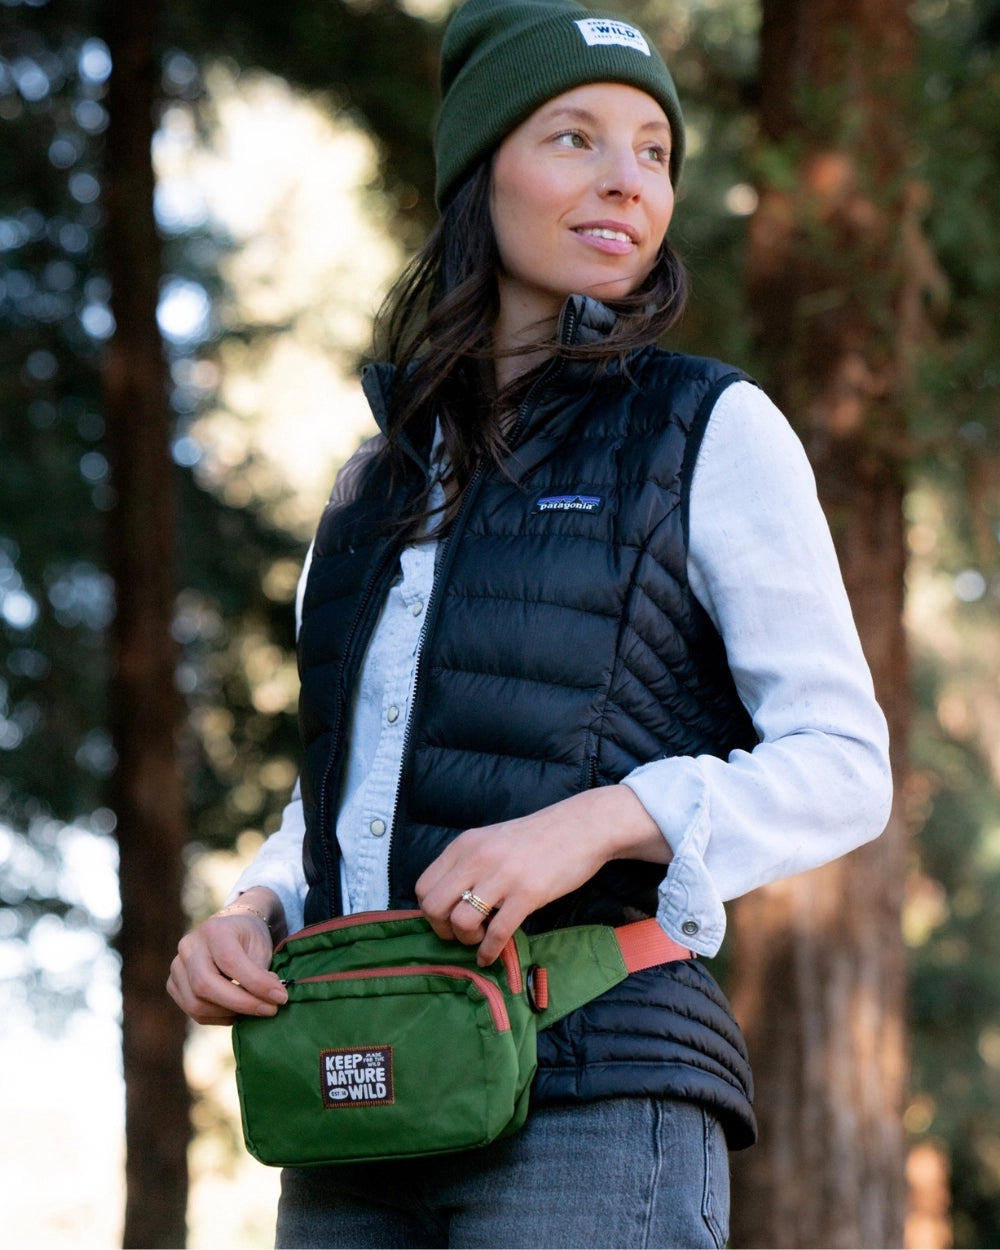 Keep Nature Wild Fanny Pack worn by a woman in the woods.